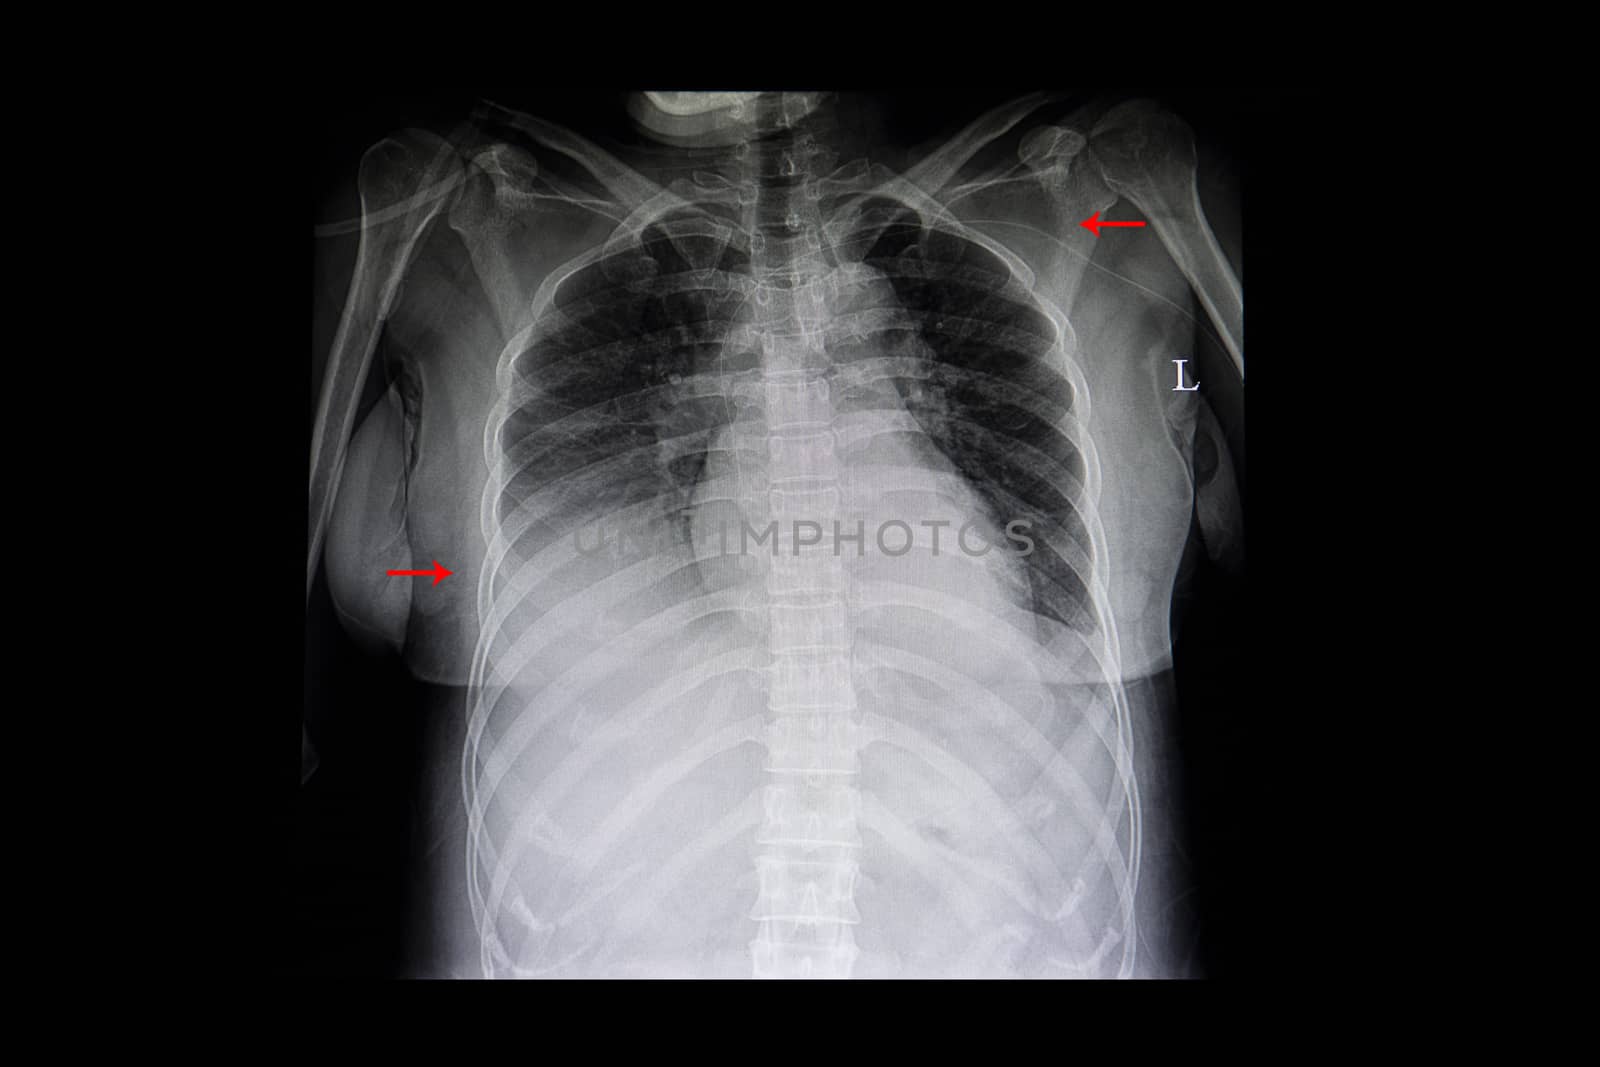 A chest xray film of a patient with right lower lung infiltration. A venous catheter is placed in the right ventricle. Severe pulmonary infection.